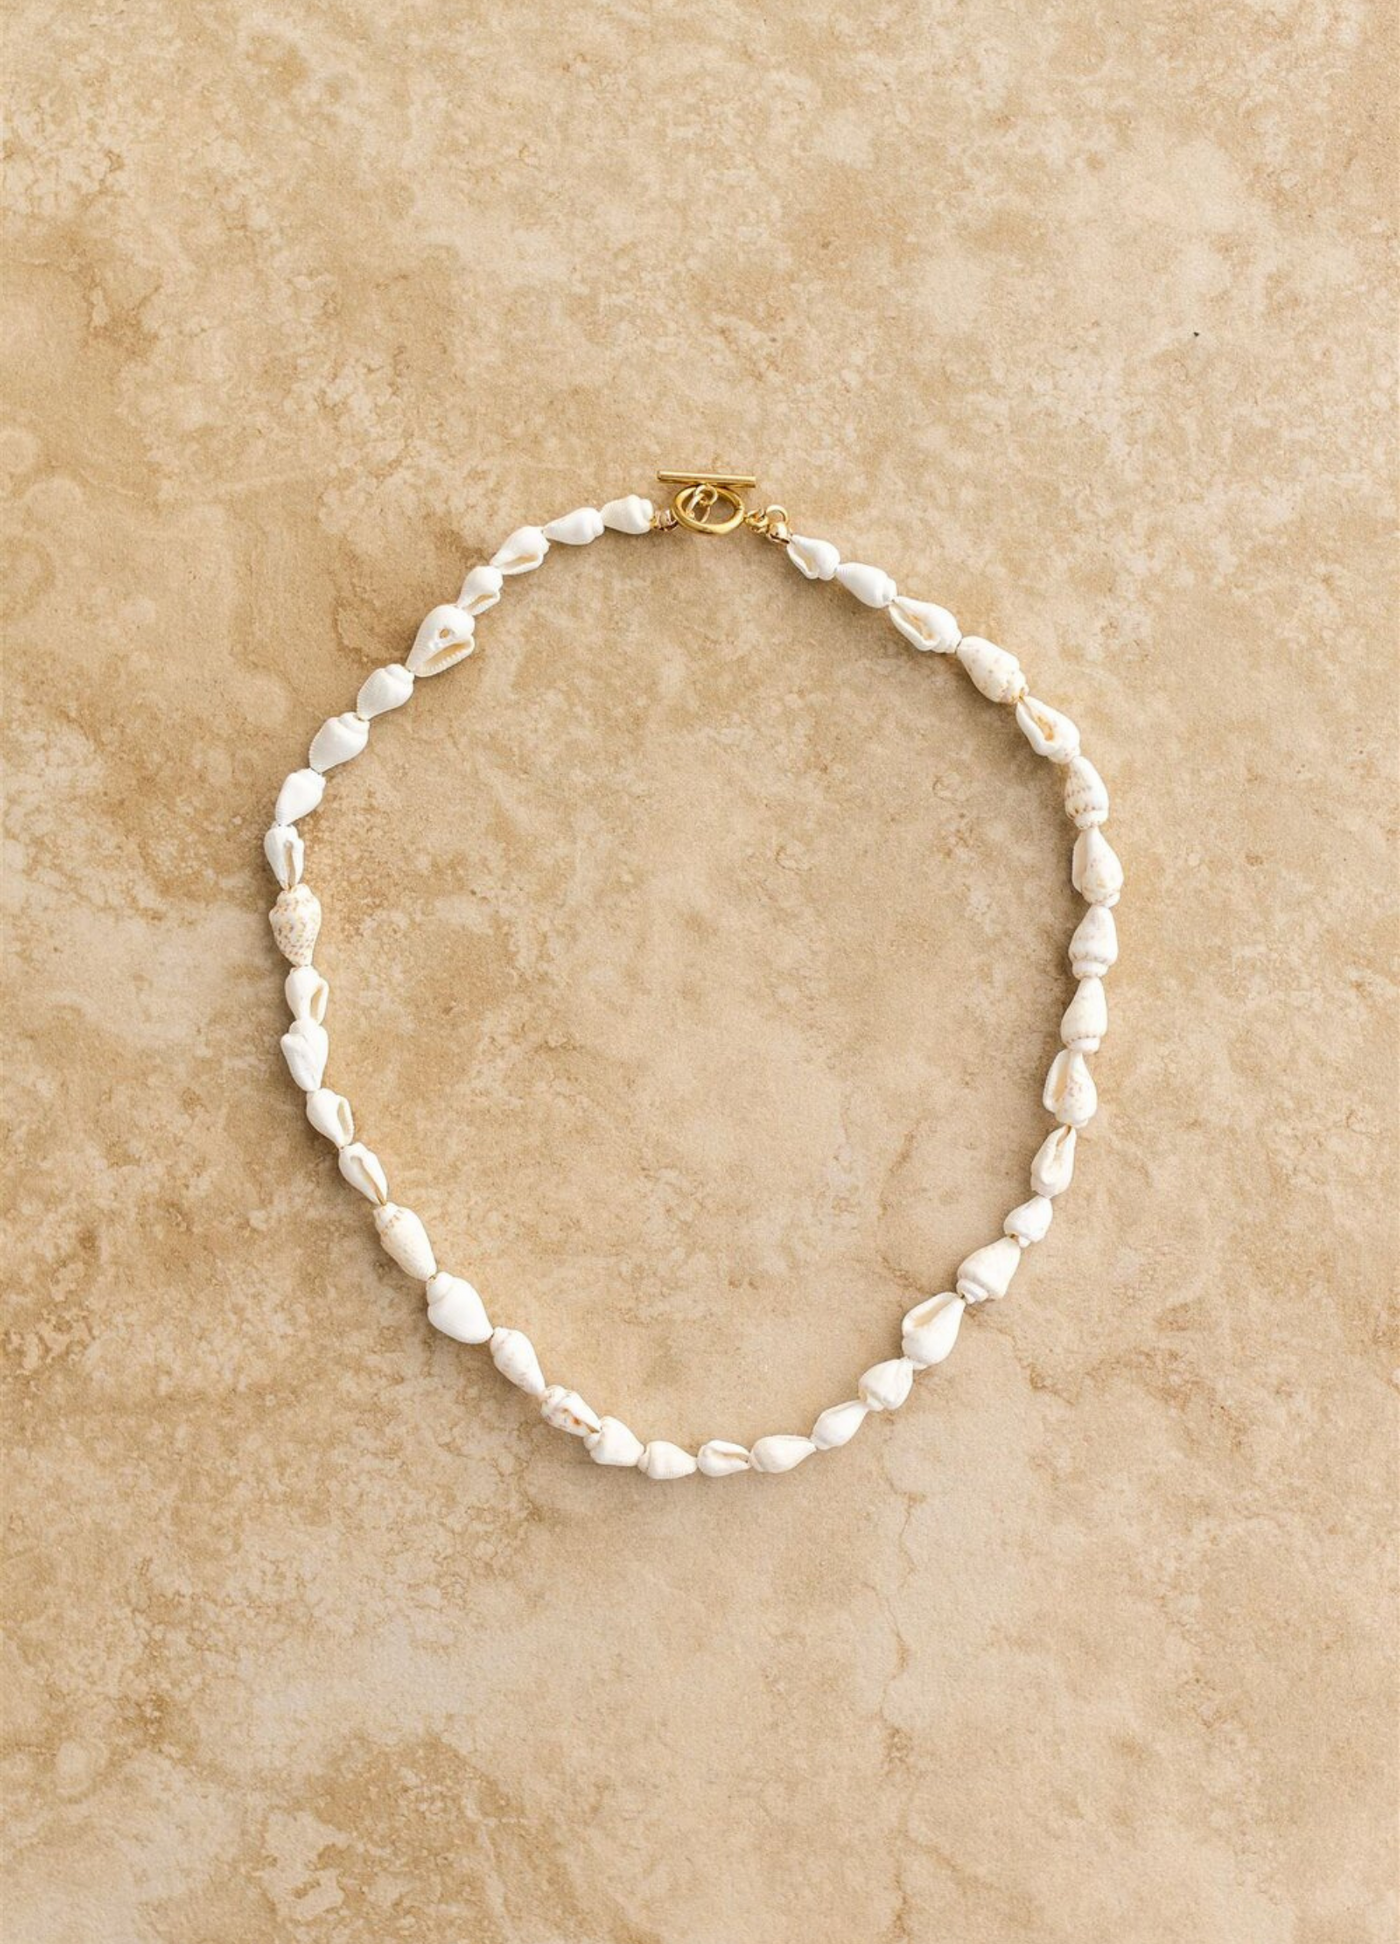 Shell necklace from Indigo & Wolfe